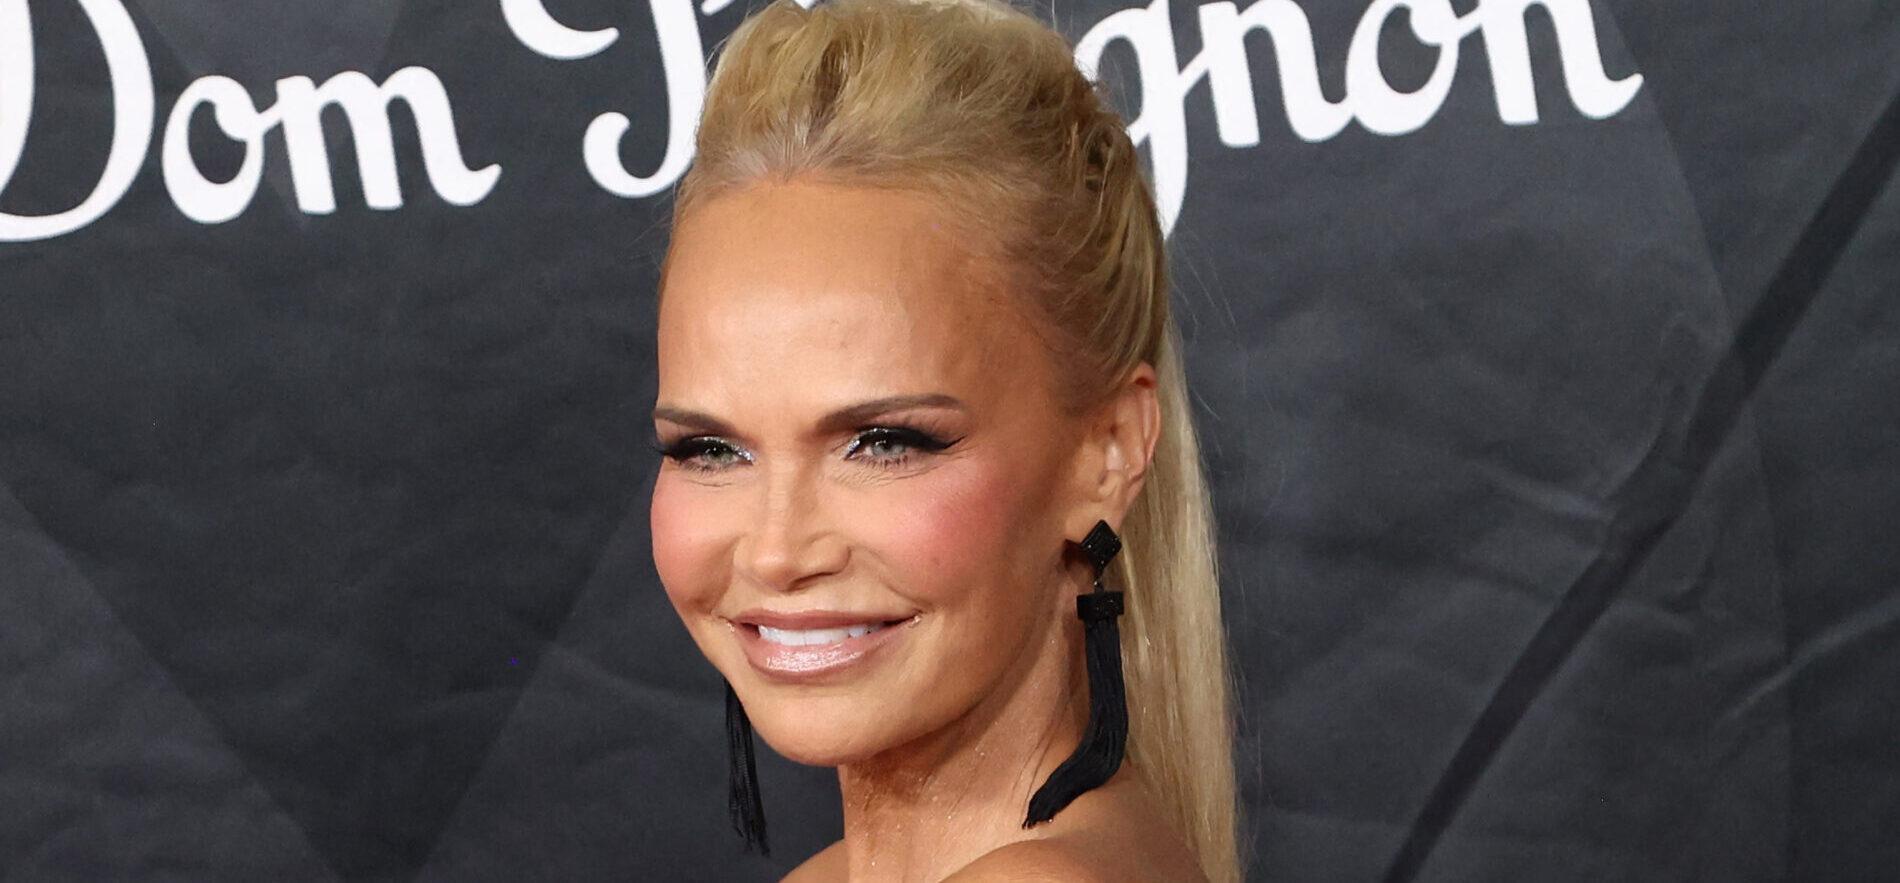 Kristin Chenoweth Reveals She Was ‘Severely Abused’ Years Ago